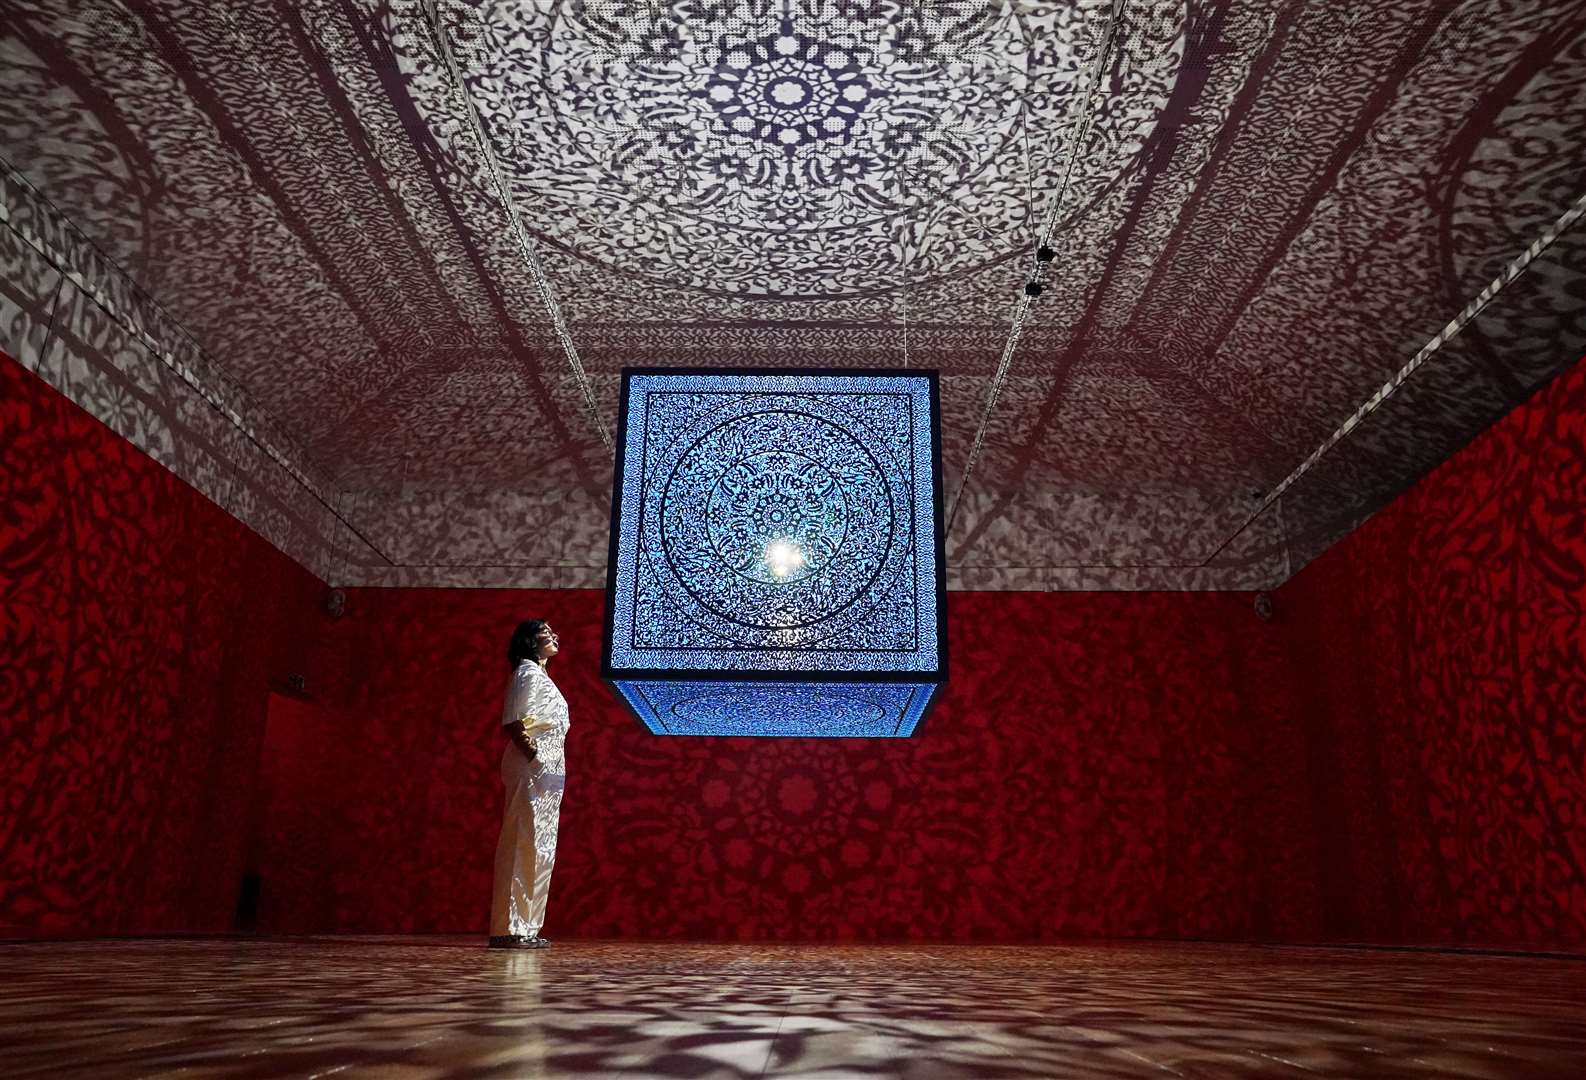 All The Flowers Are For Me features patterns inspired by Islamic art and architecture (Jonathan Brady/PA)